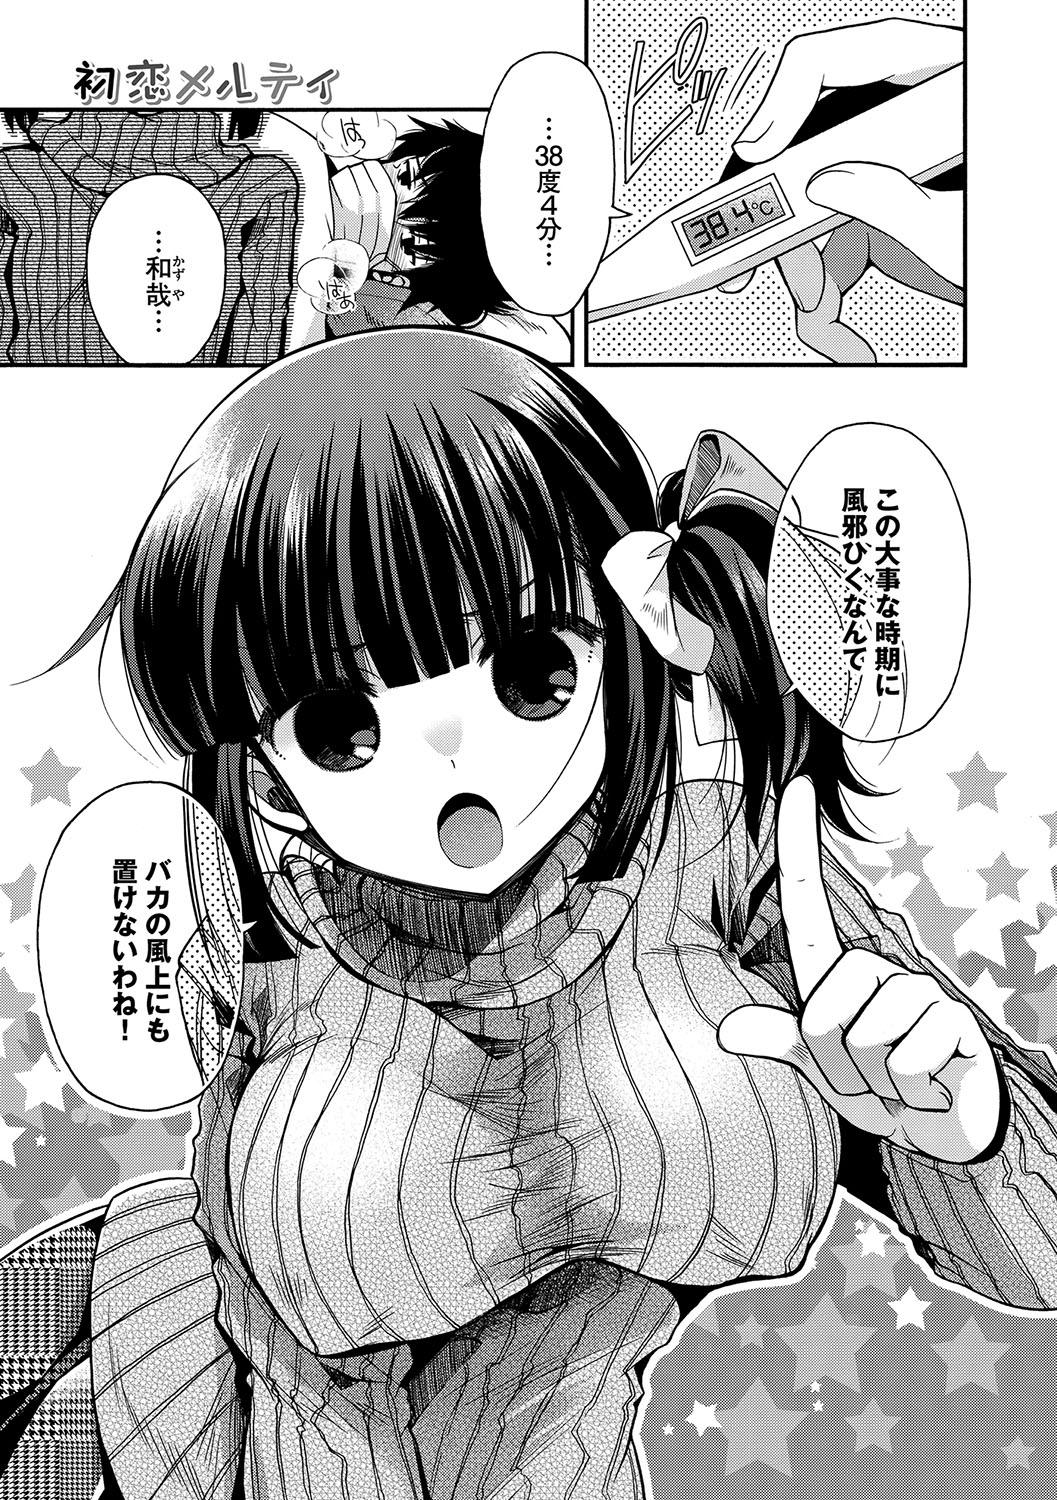 Hatsukoi Melty - Melty First Love 155